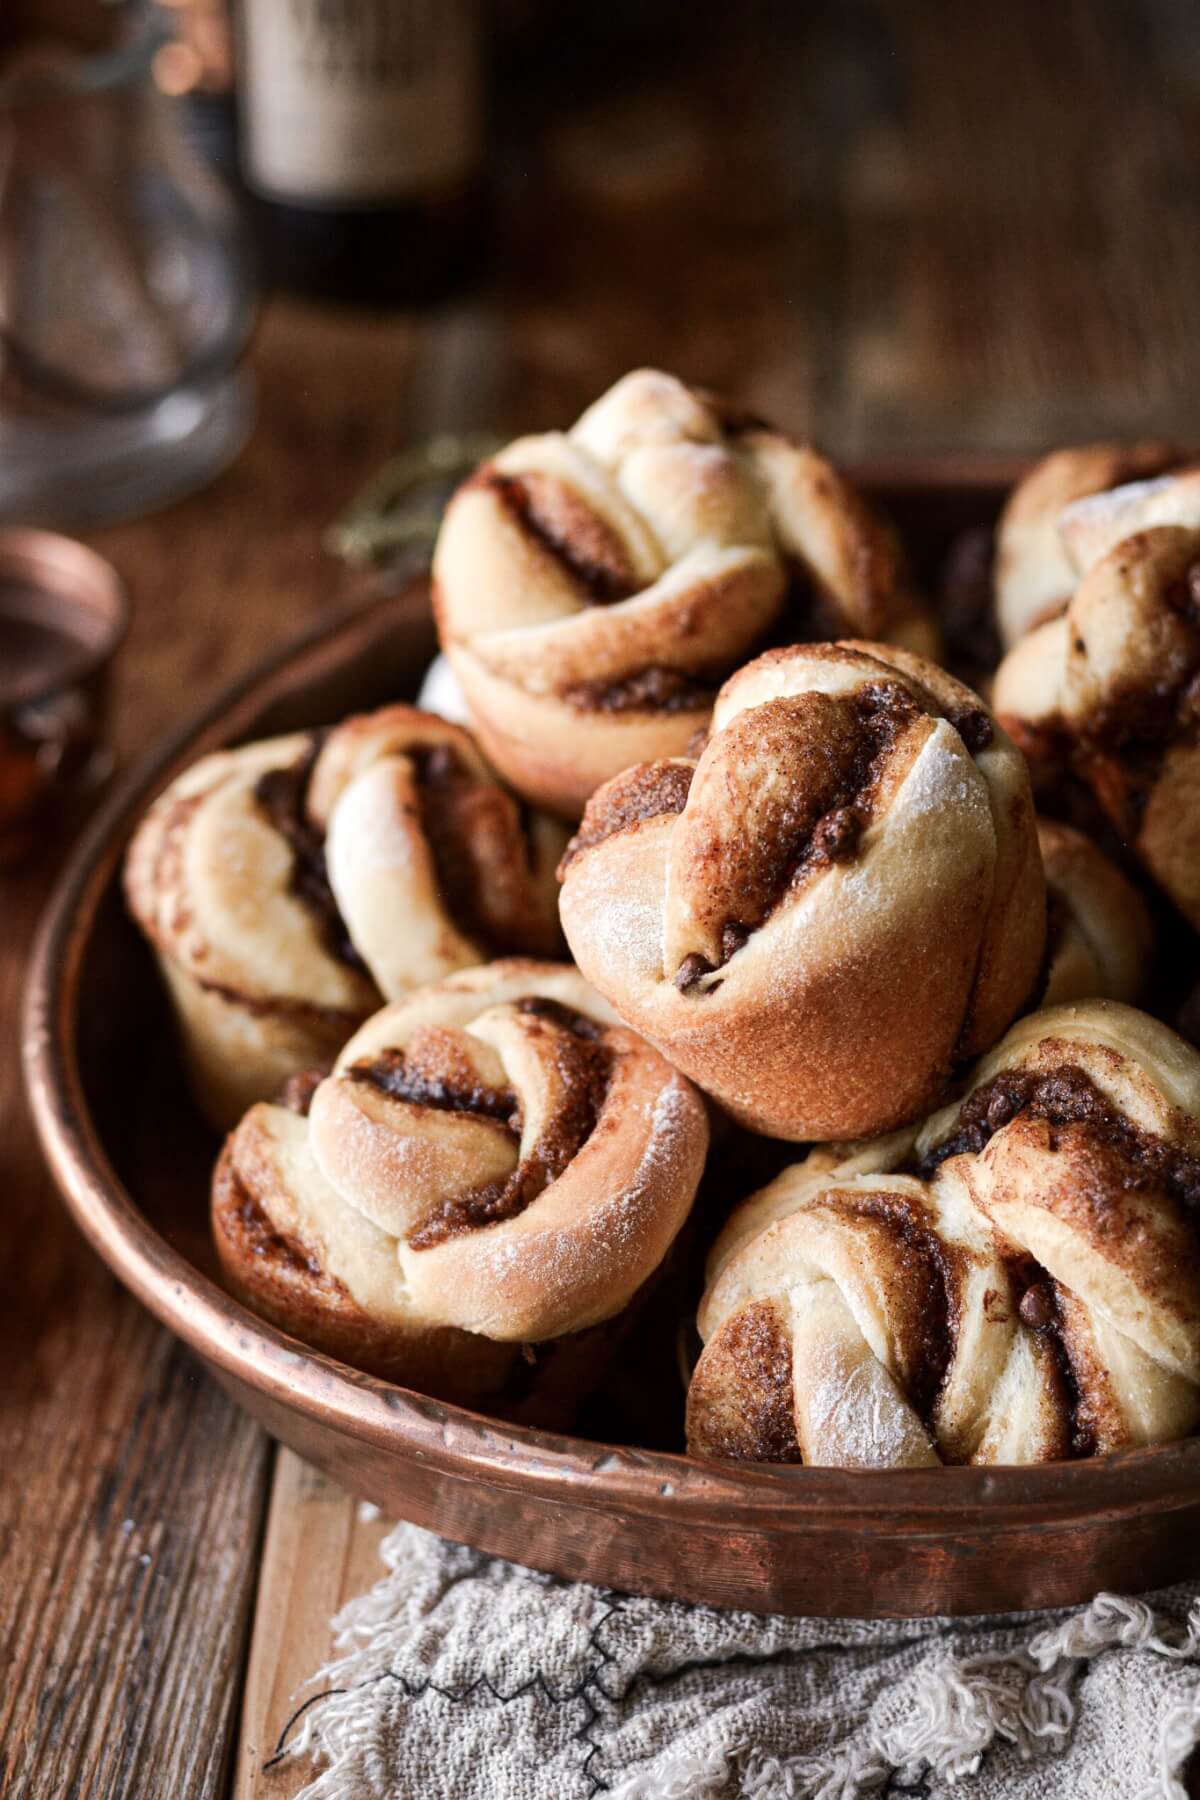 Chocolate cinnamon roll knots piled in a copper dish.